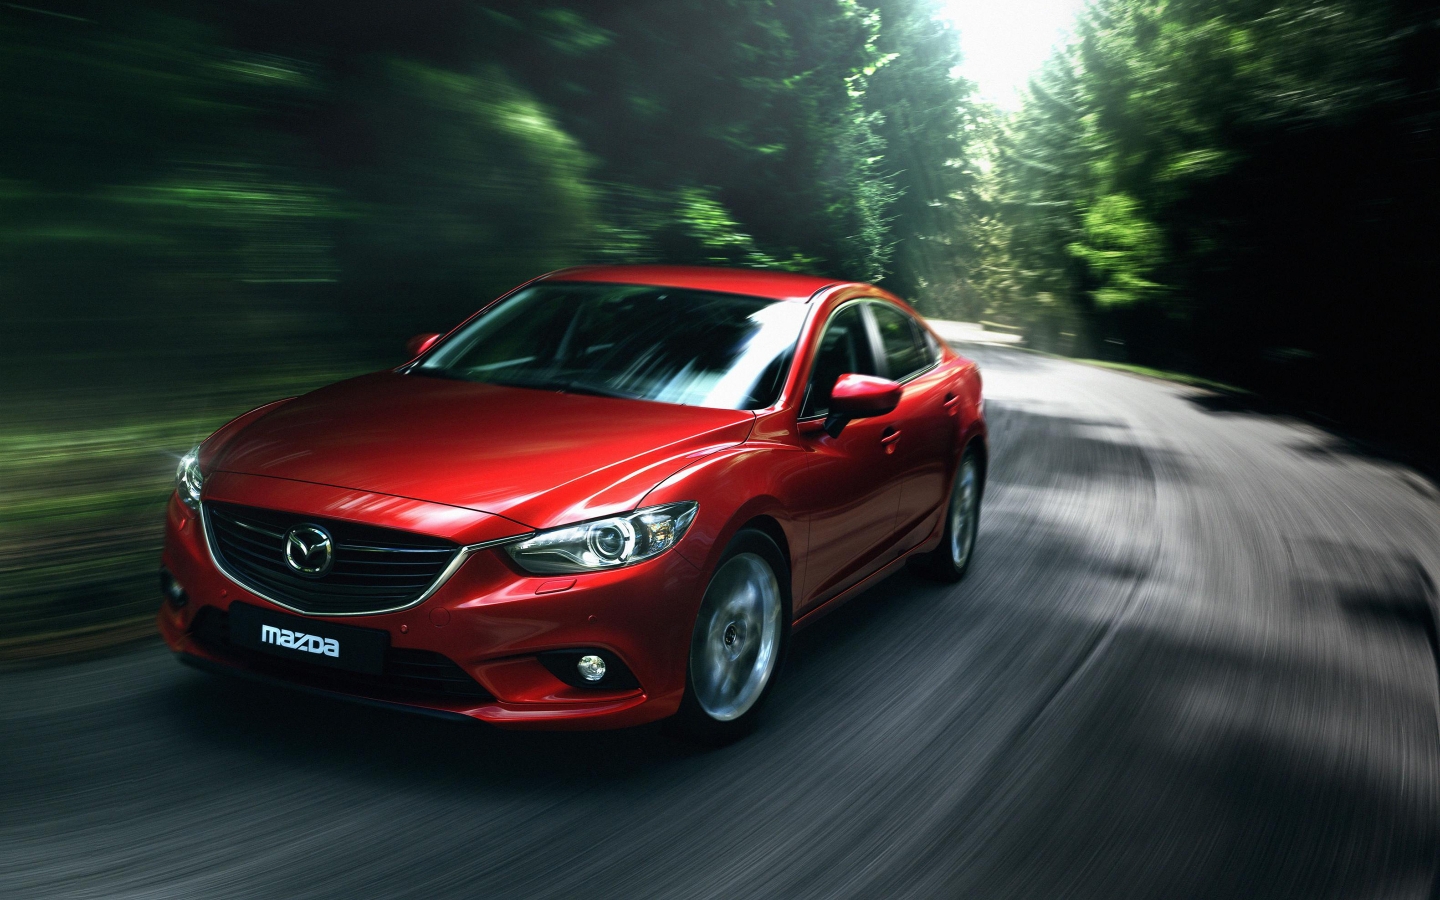 Gorgeous Red Mazda 6 for 1440 x 900 widescreen resolution